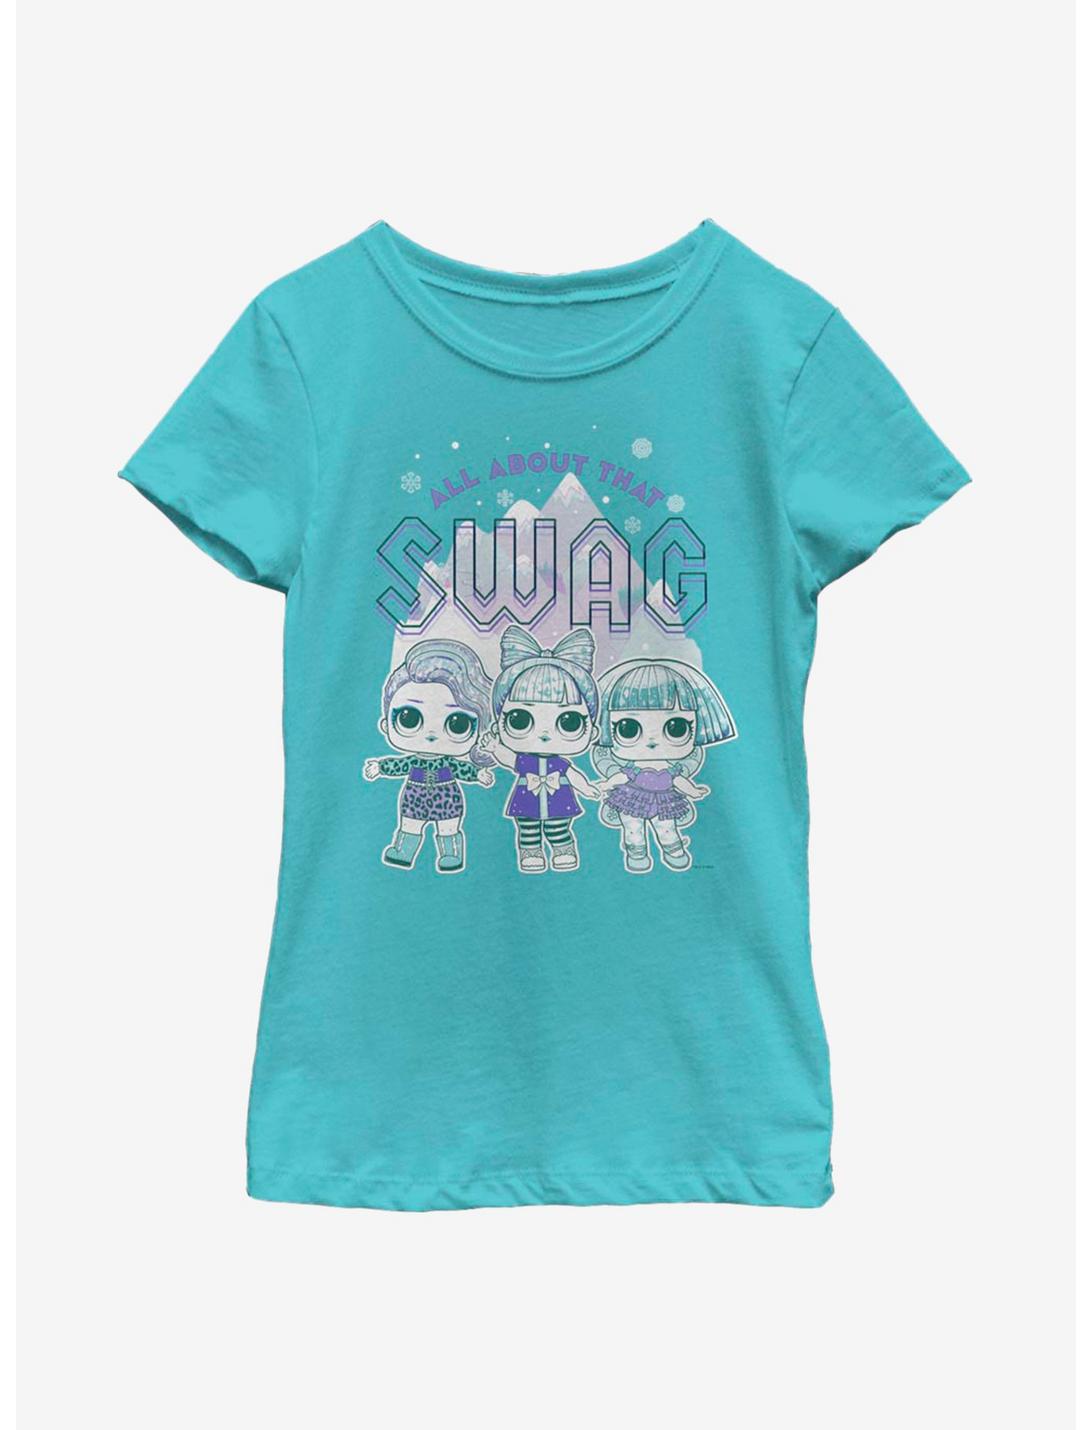 L.O.L. Surprise! All About Swag Youth Girls T-Shirt, TAHI BLUE, hi-res